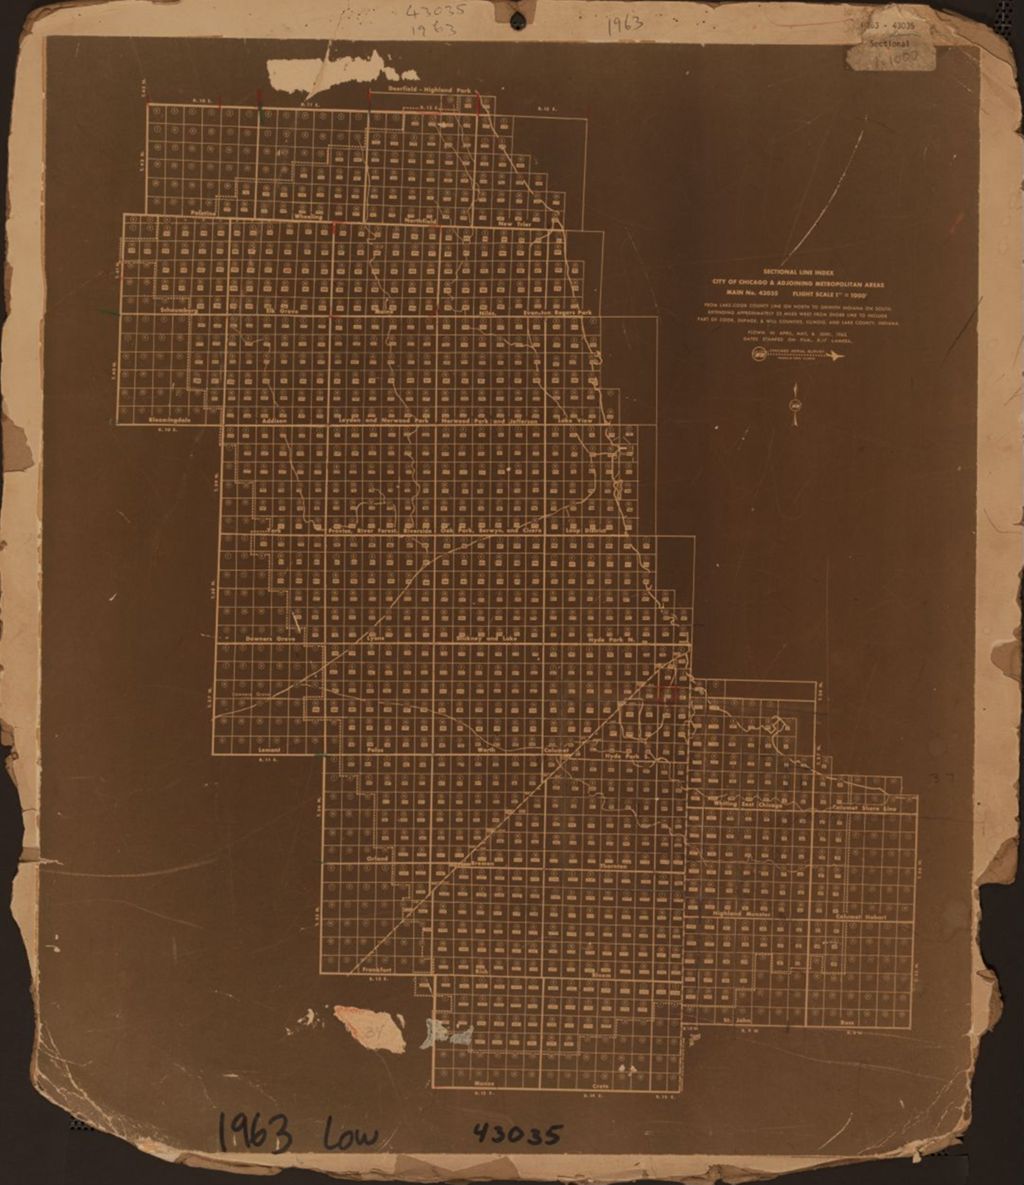 Miniature of Aerial survey index map for 1963 Chicago Plan Commission Aerial Survey (43035)